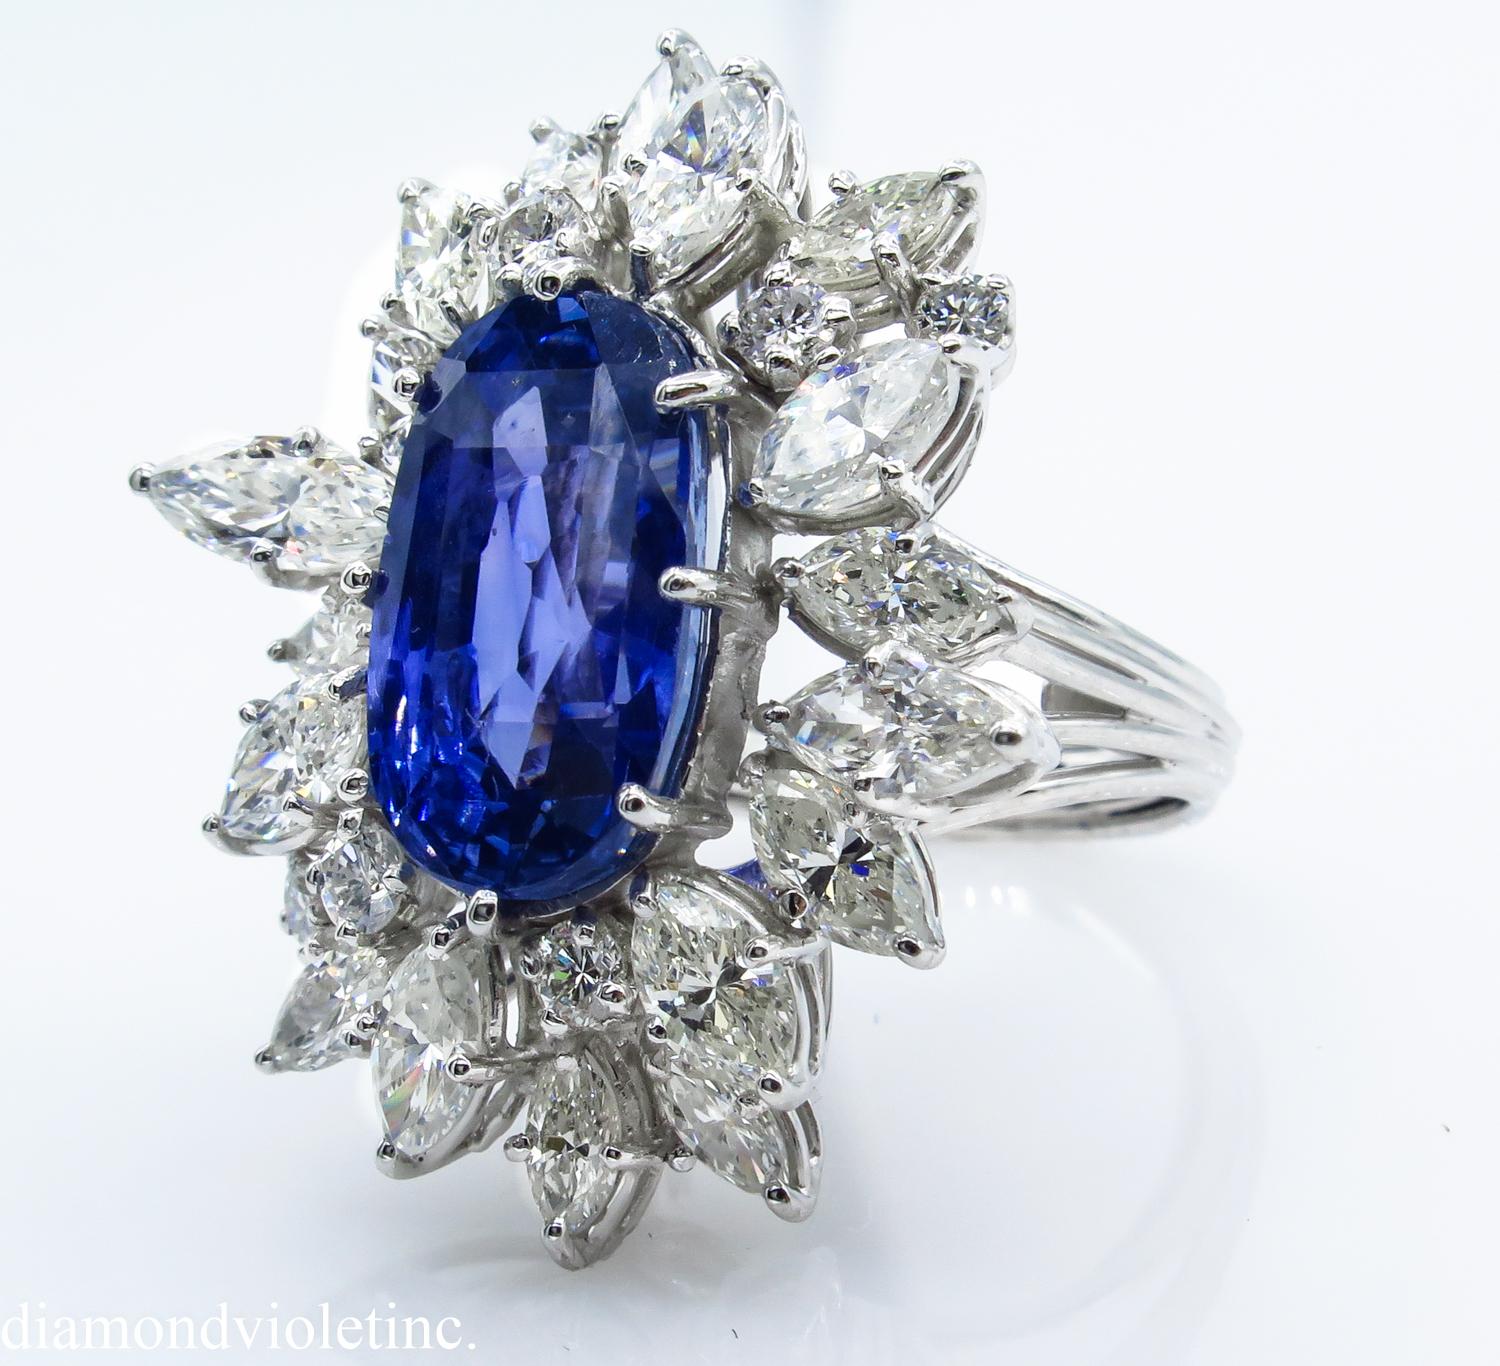 An Amazing Engagement Anniversary Cluster Handmade PLATINUM (stamped) Ring with GIA Certified 10.59CT NATURAL Ceylon Oval shaped Violetish Blue Sapphire; with measurements of 14.77x8.87x7.57mm. Gorgeous Dark Cornflower True Sky Blue color!! NO